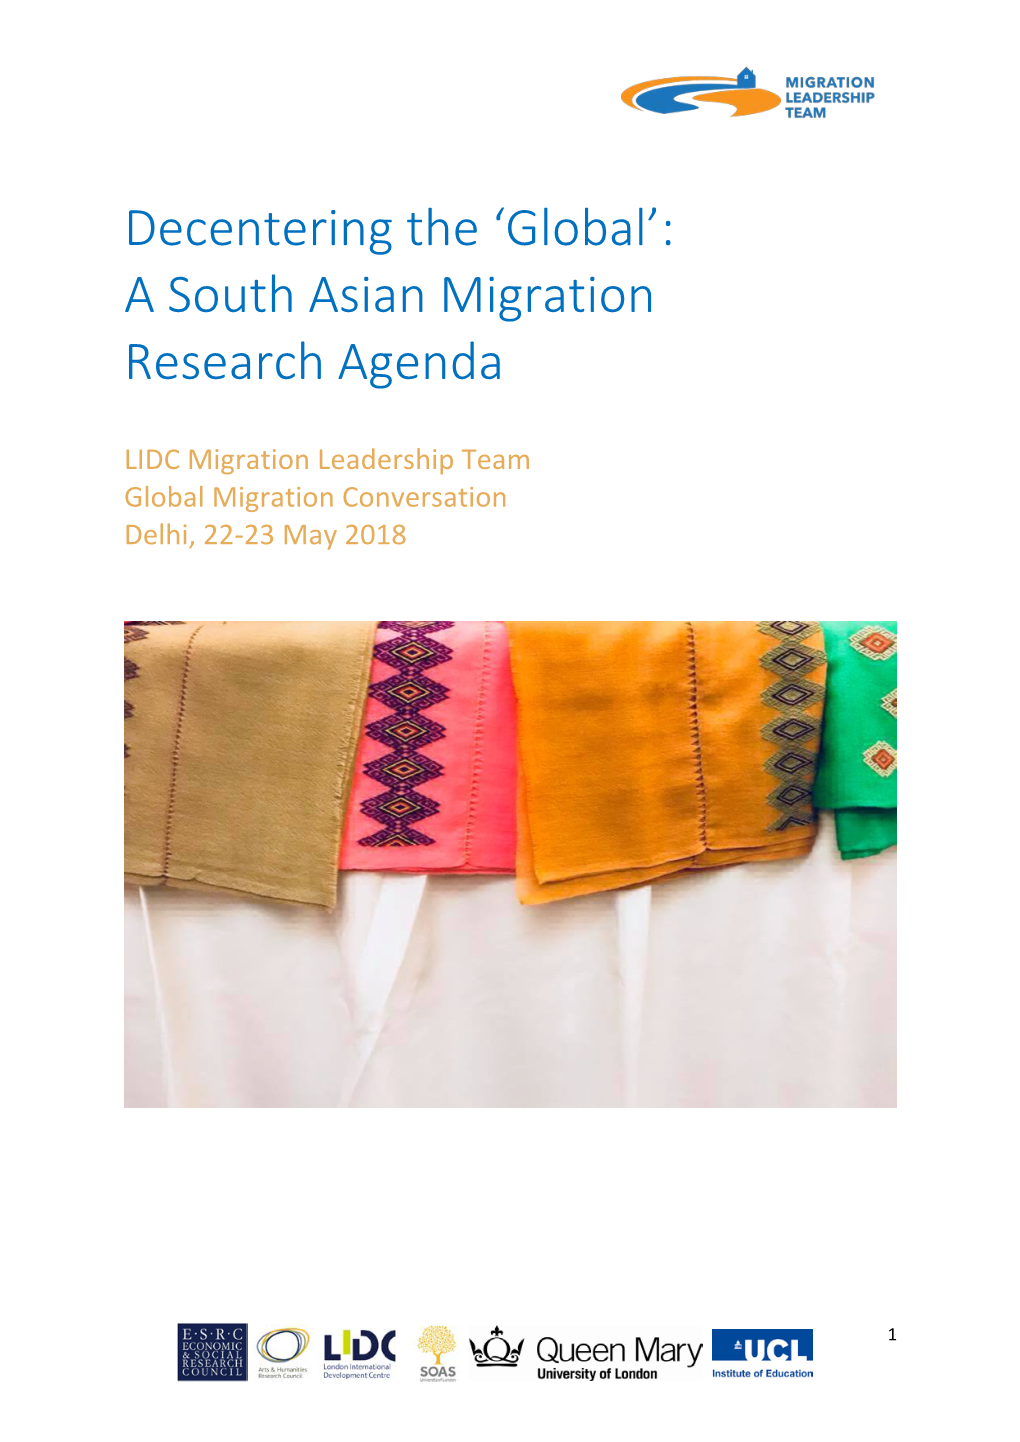 Decentering the 'Global': a South Asian Migration Research Agenda